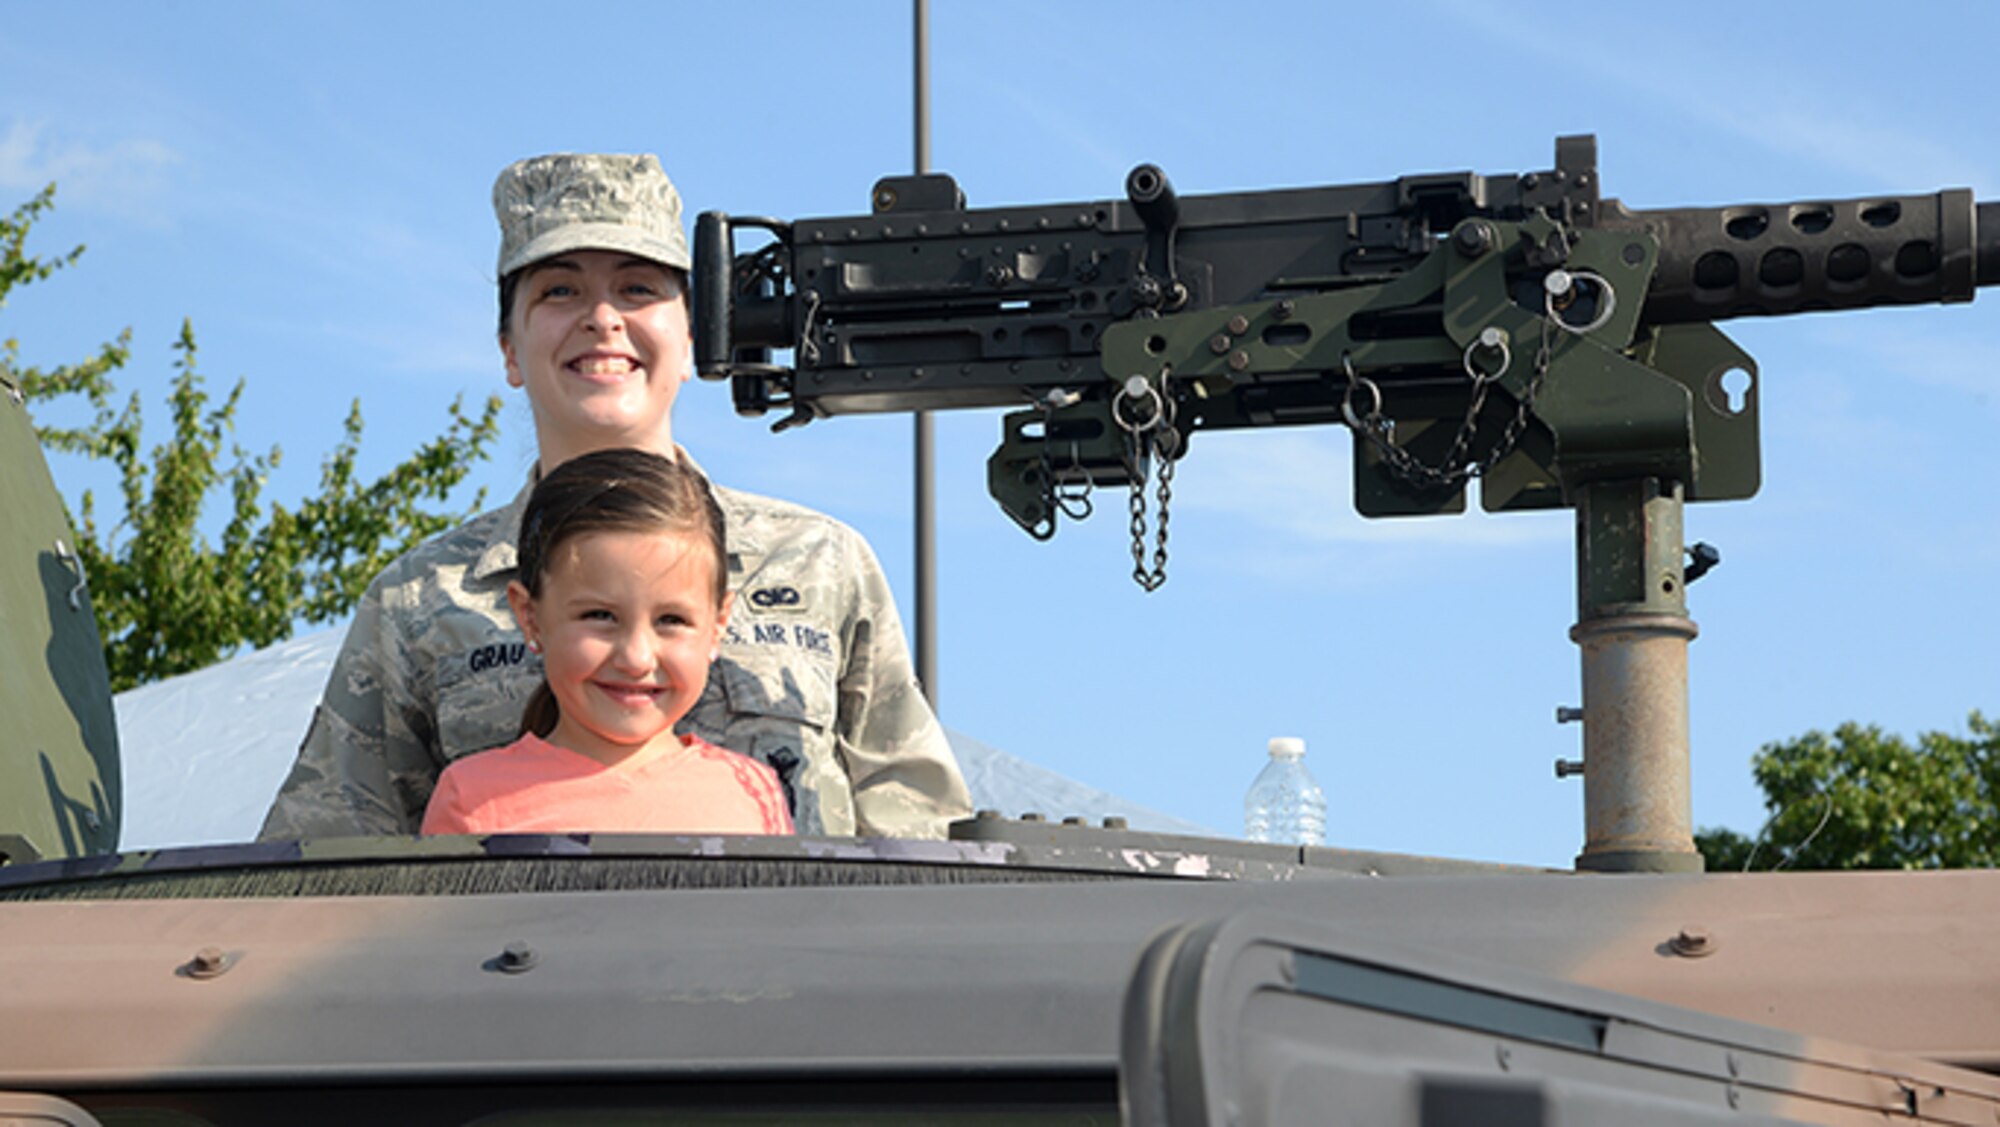 A picture of U.S. Air Force Senior Airman Kelly A. Grau, a member of the 177th Fighter Wing’s Security Forces Squadron, posing for a photo with a community member.